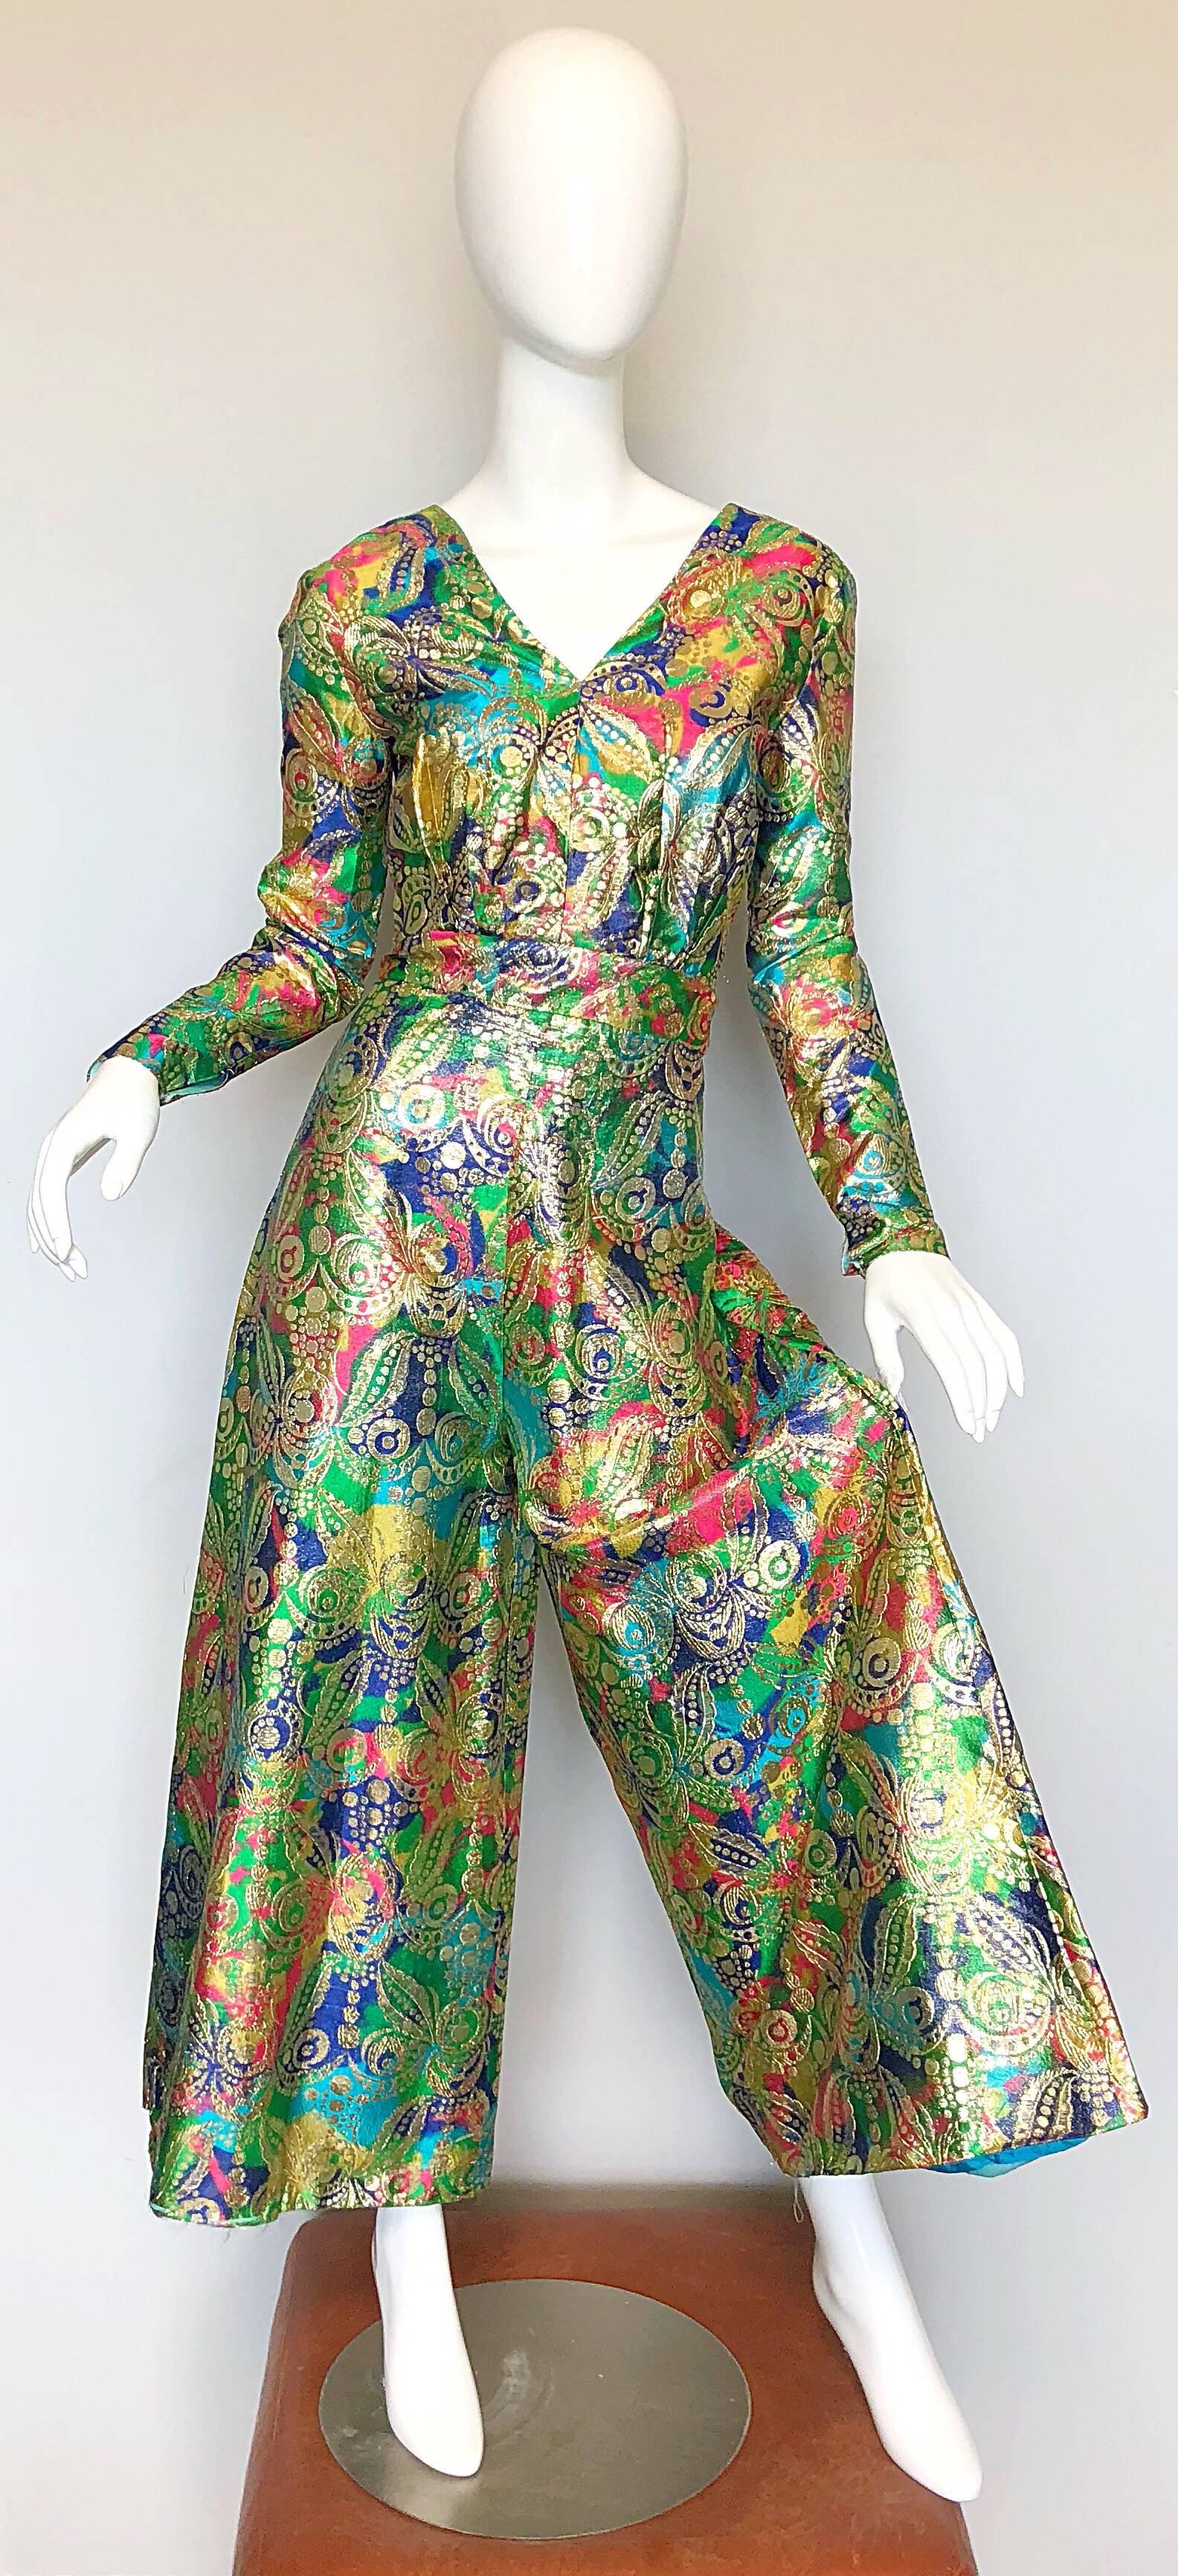 Amazing vintage 1970s long sleeve metallic paisley wide leg / palazzo jumpsuit! Features a tailored bodice with sleek long sleeves. Forgiving wide leg pants look fantastic on! Full metal zipper up the back with hook-and-eye closure. Very well made,